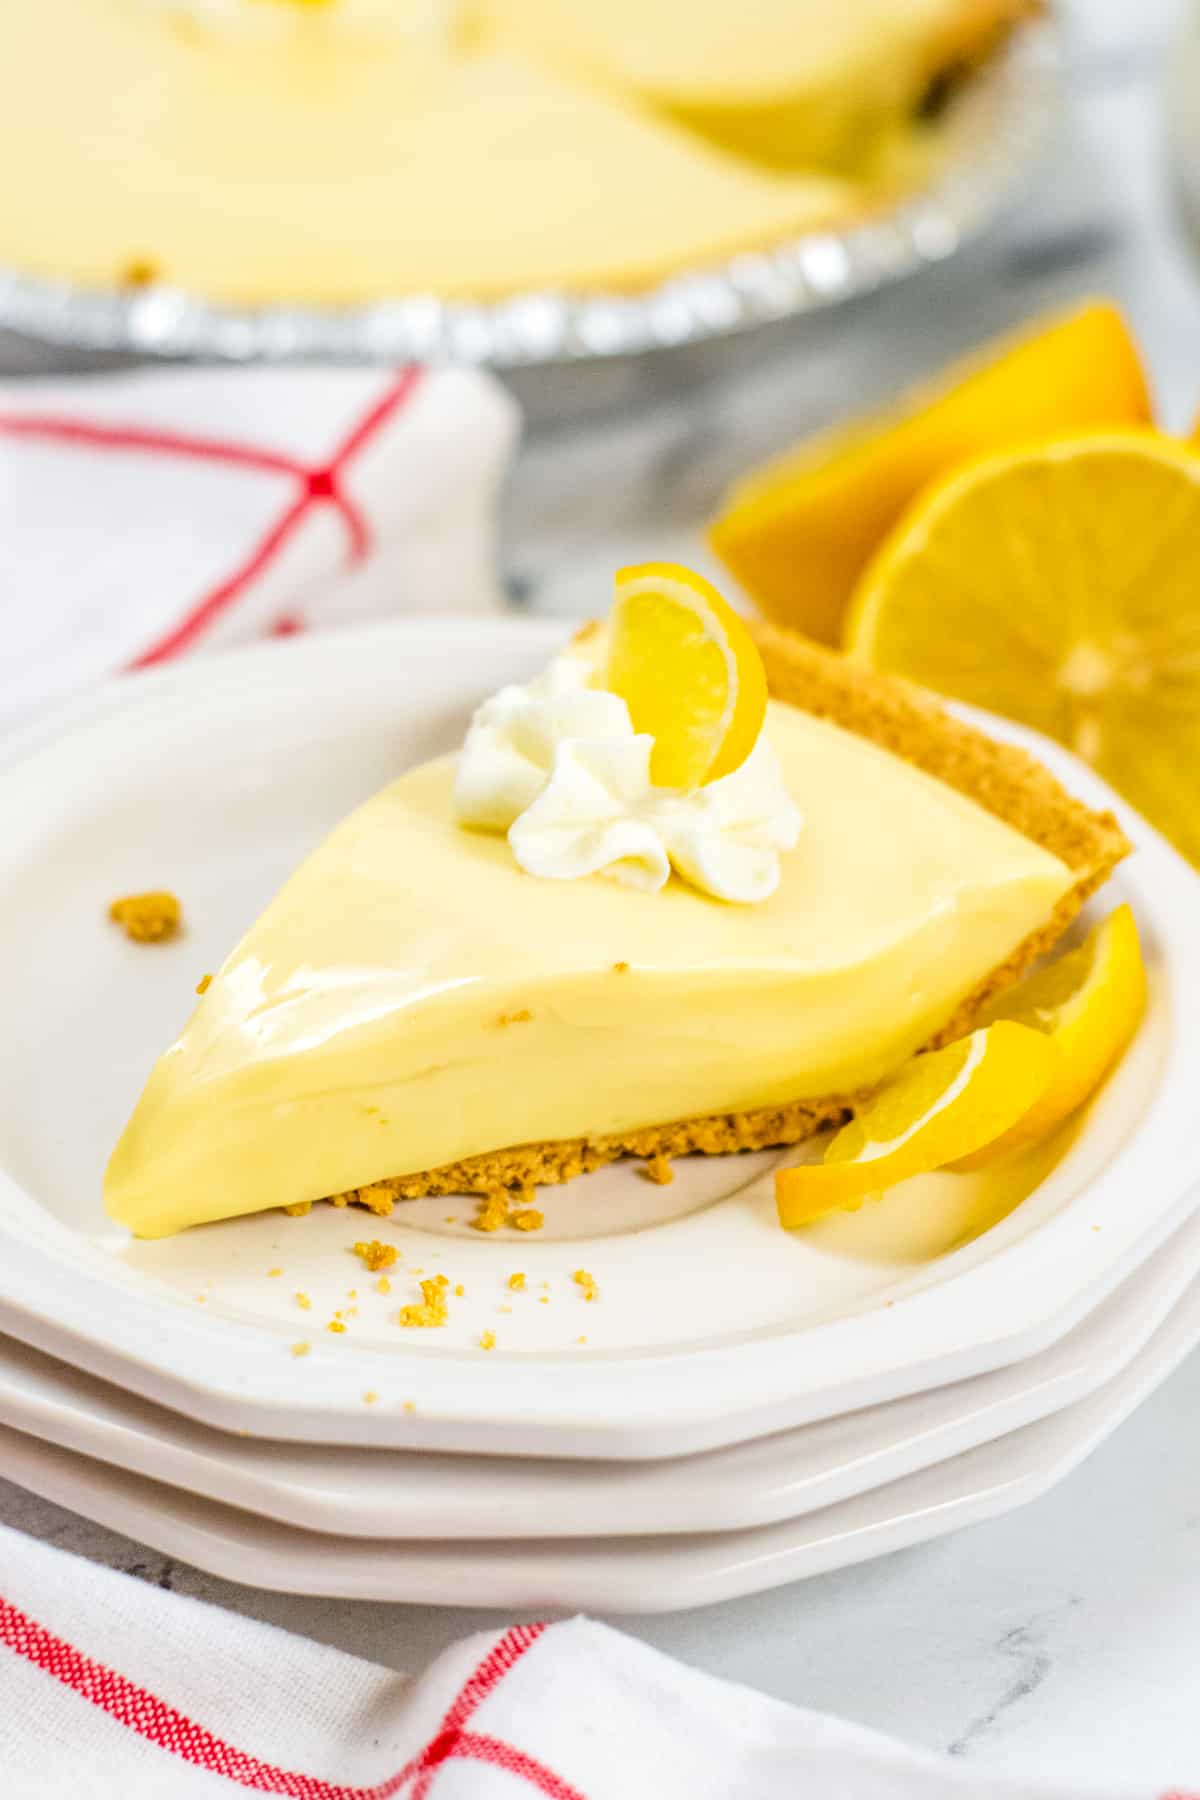 Lemon Icebox Pie slice on stack of white plates. Pie is topped with dollop of whipped cream and slice of lemon. Whole pie can be seen in background, as well as fresh lemons